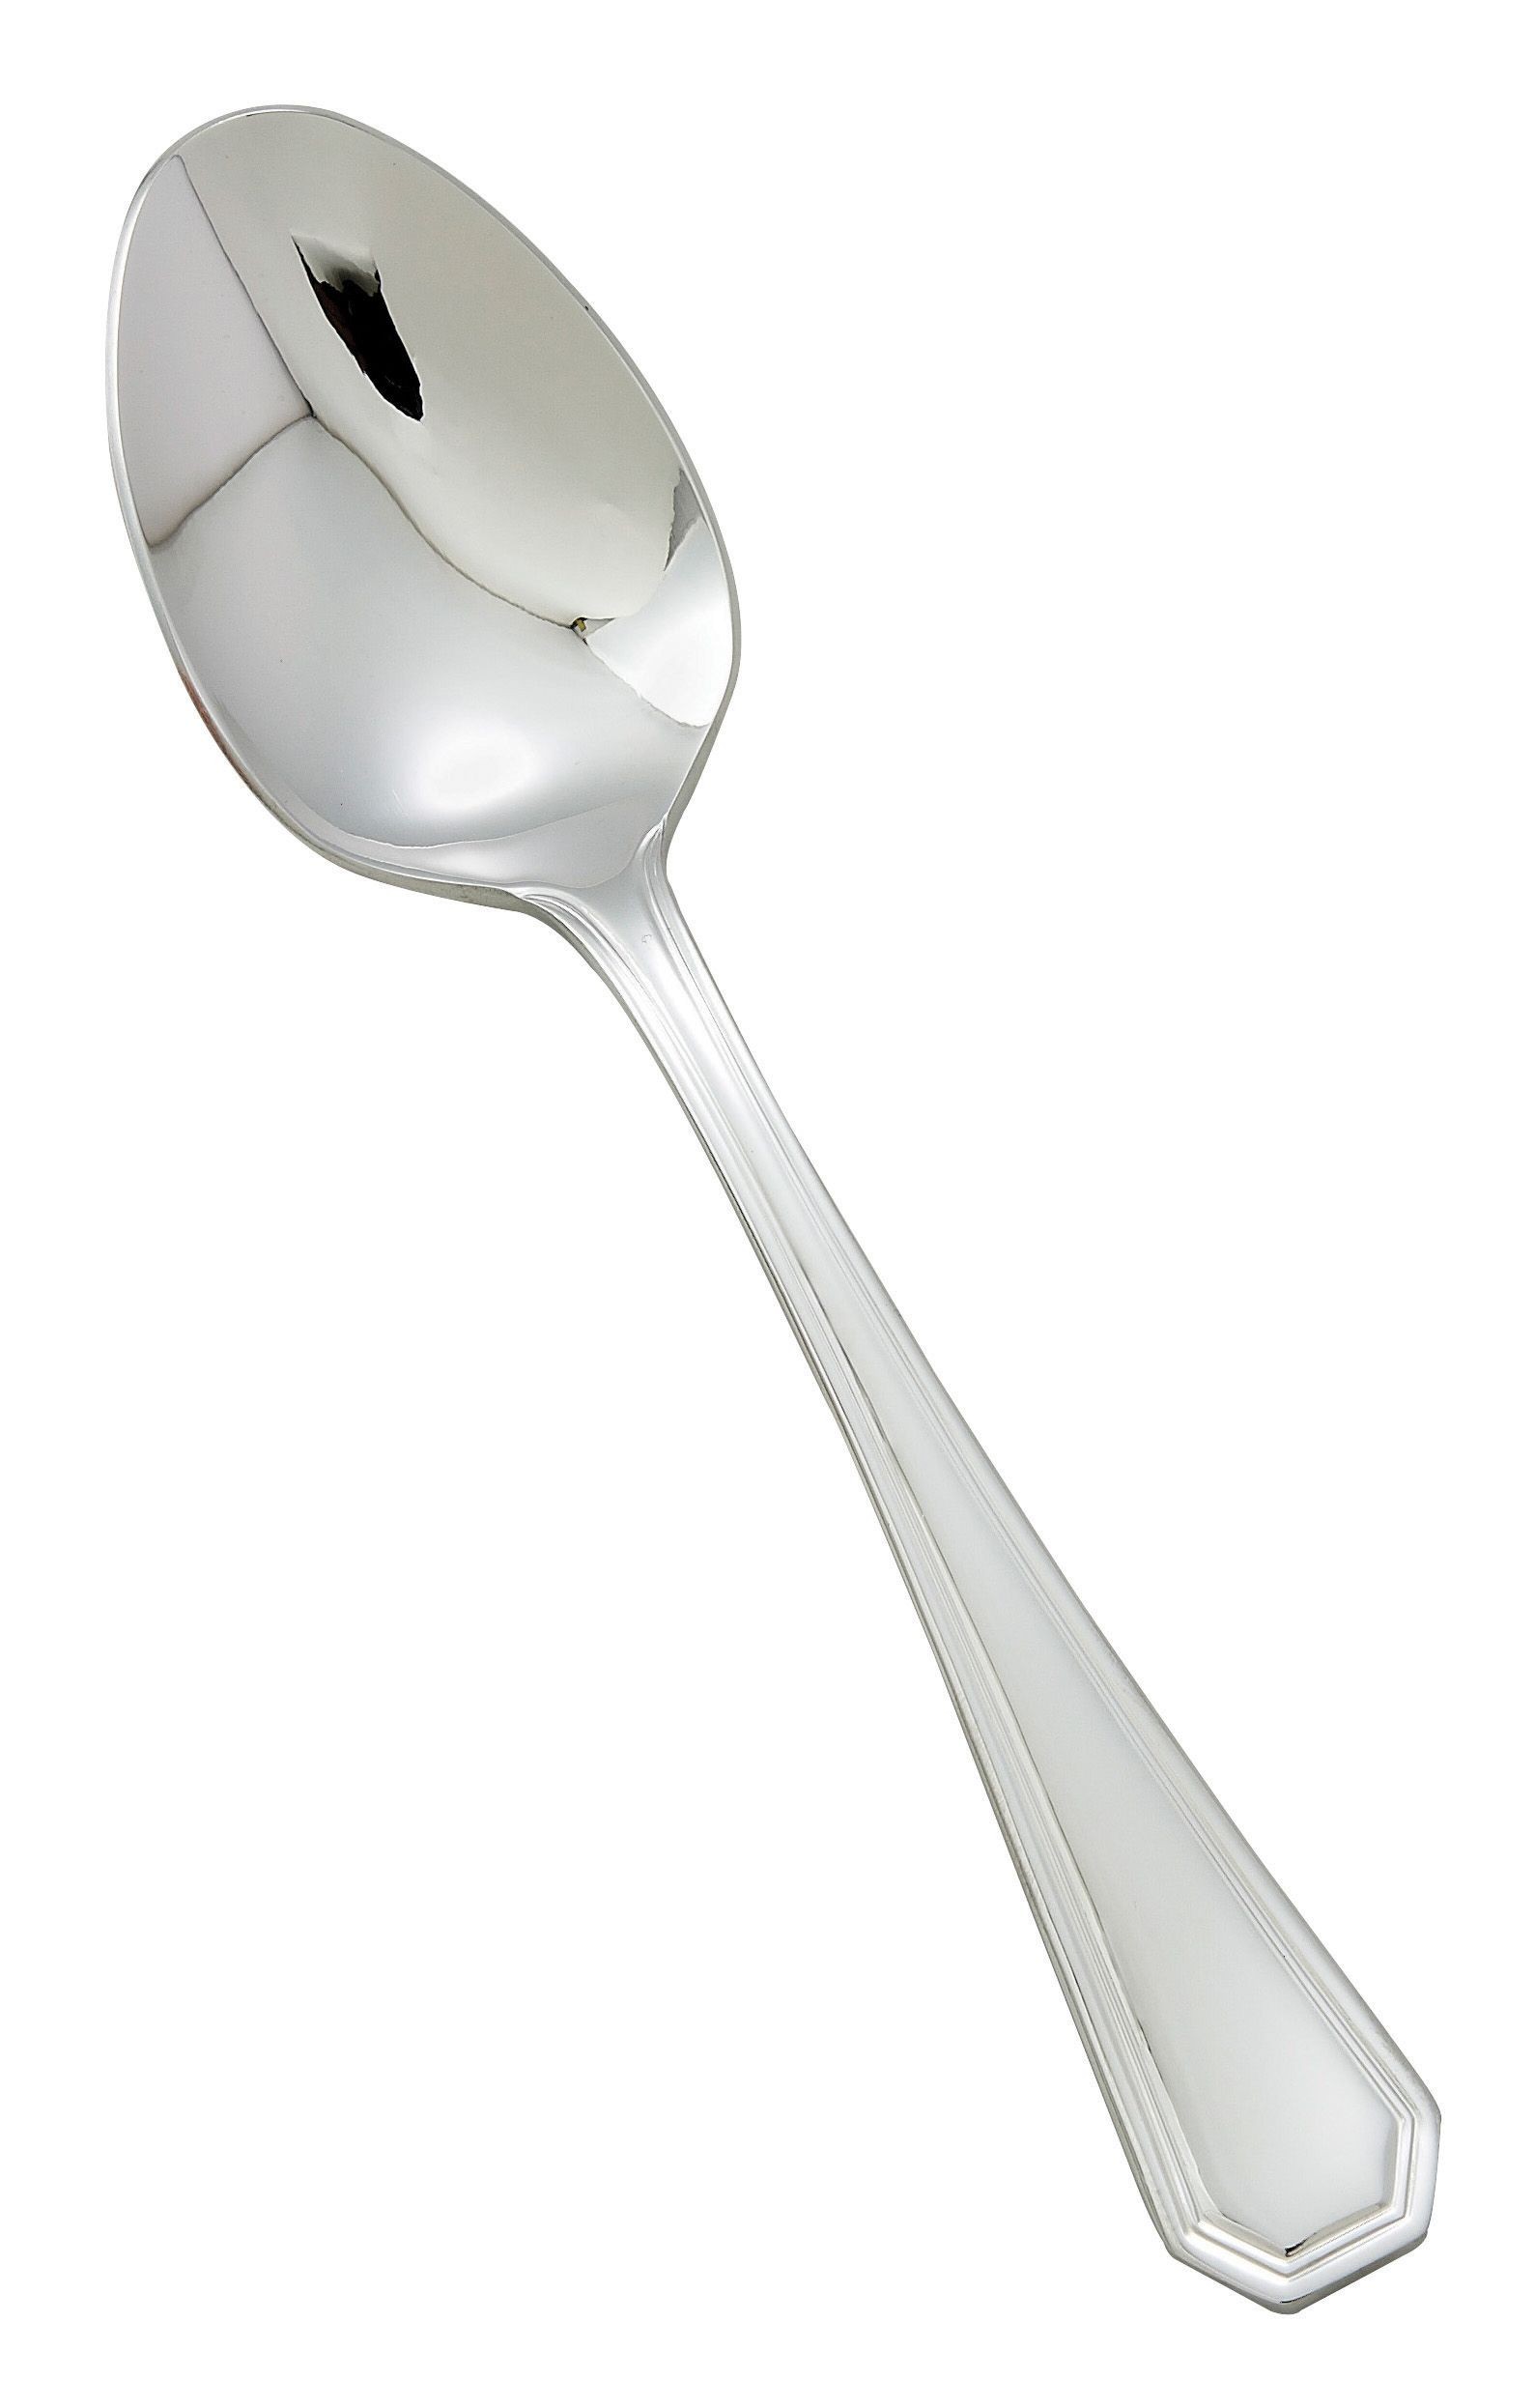 Winco 0035-03 Victoria Extra Heavy Stainless Steel Dinner Spoon (12/Pack)